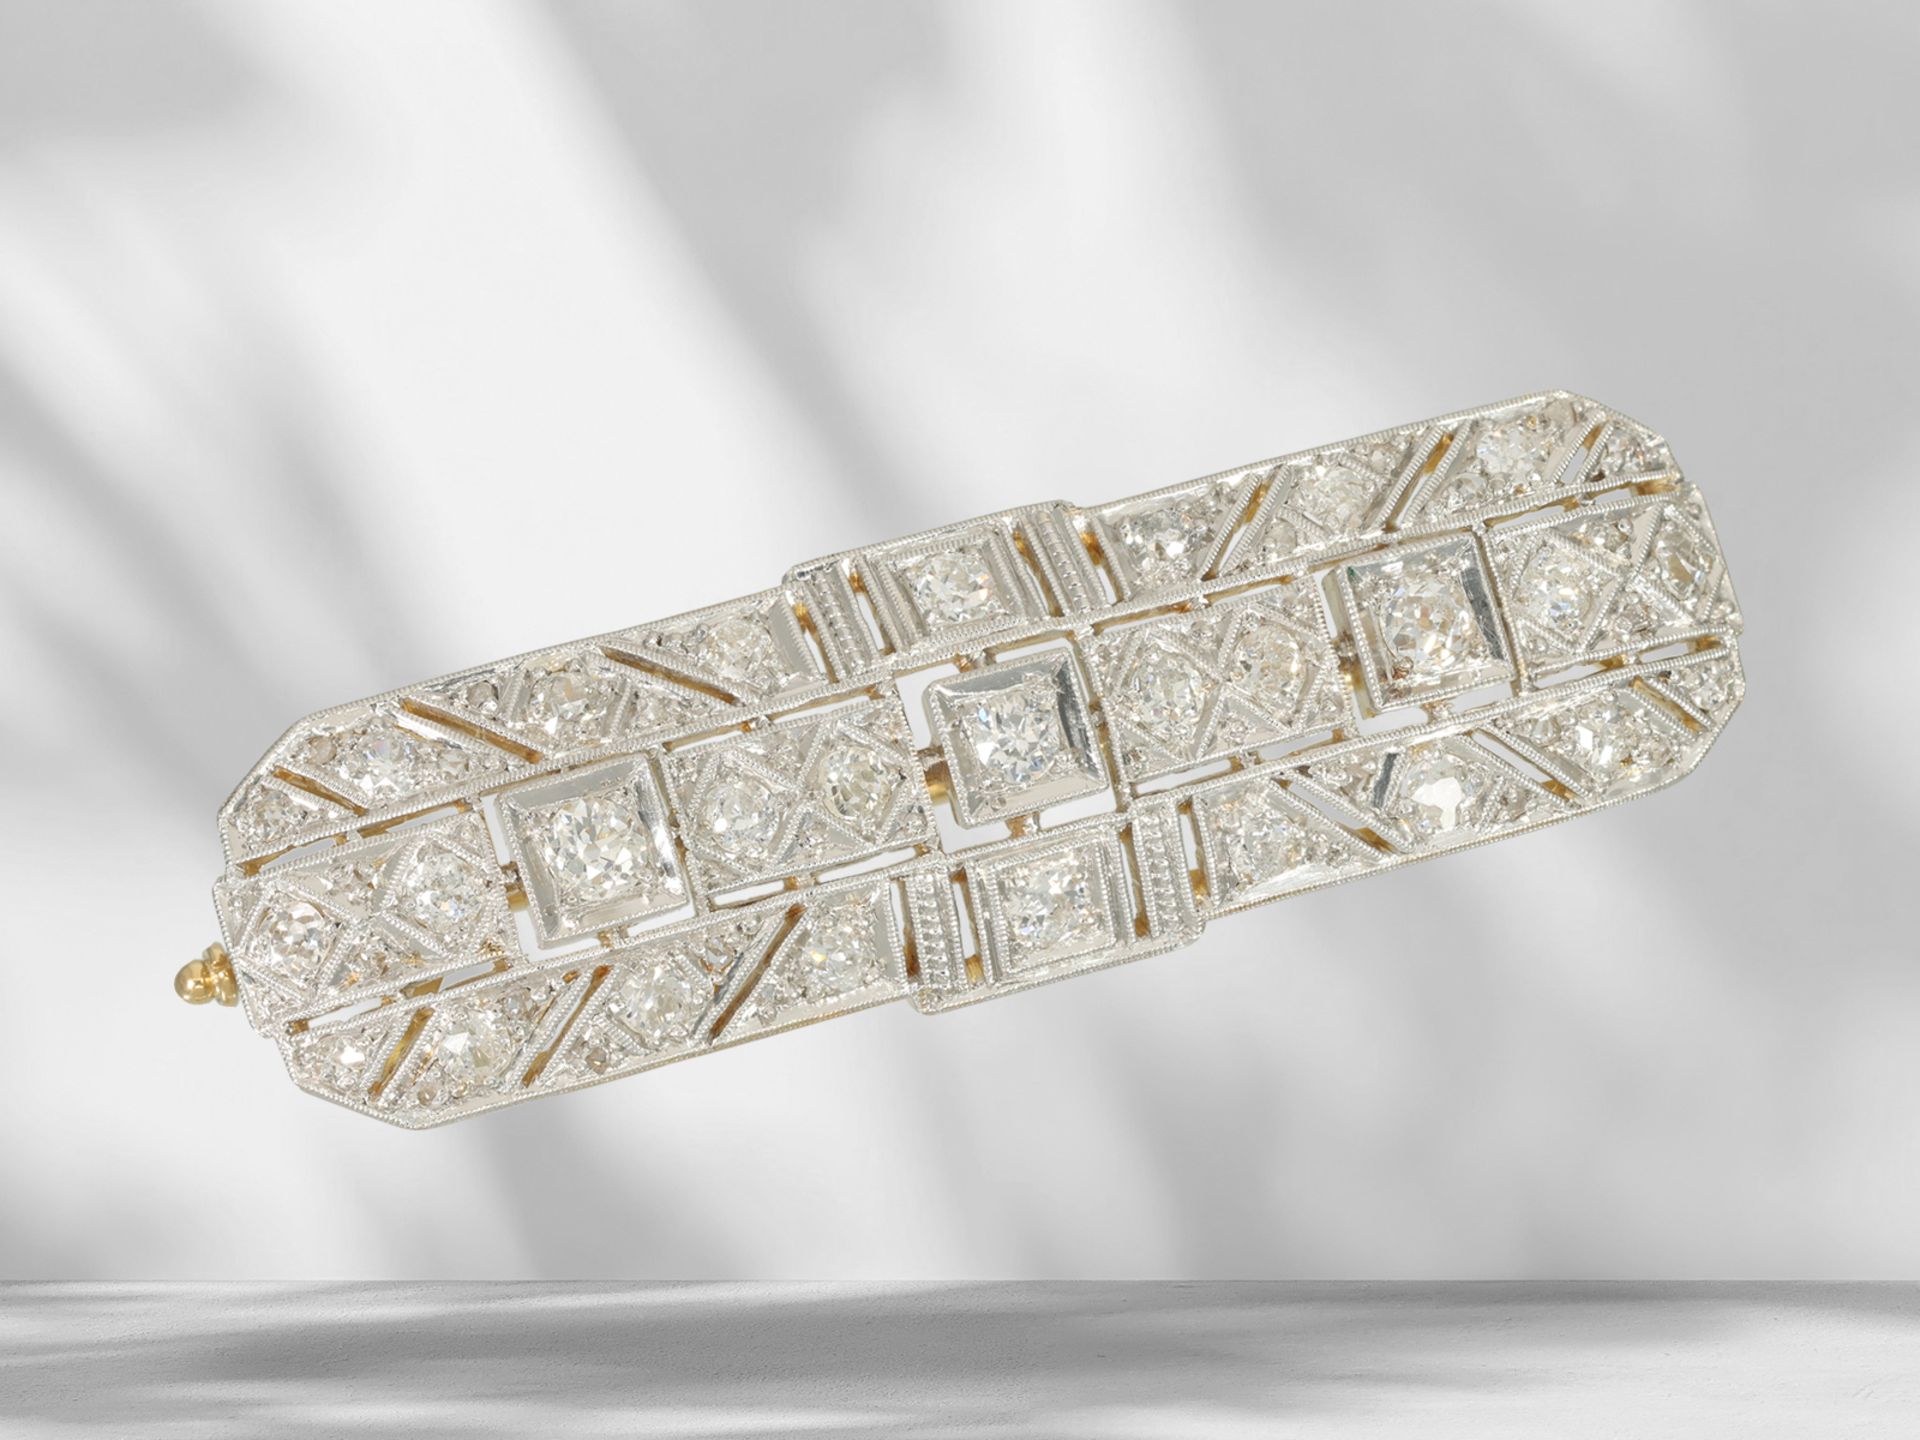 Brooch: antique, elaborate and filigree Art Deco diamond brooch, possibly around 1920 - Image 3 of 5